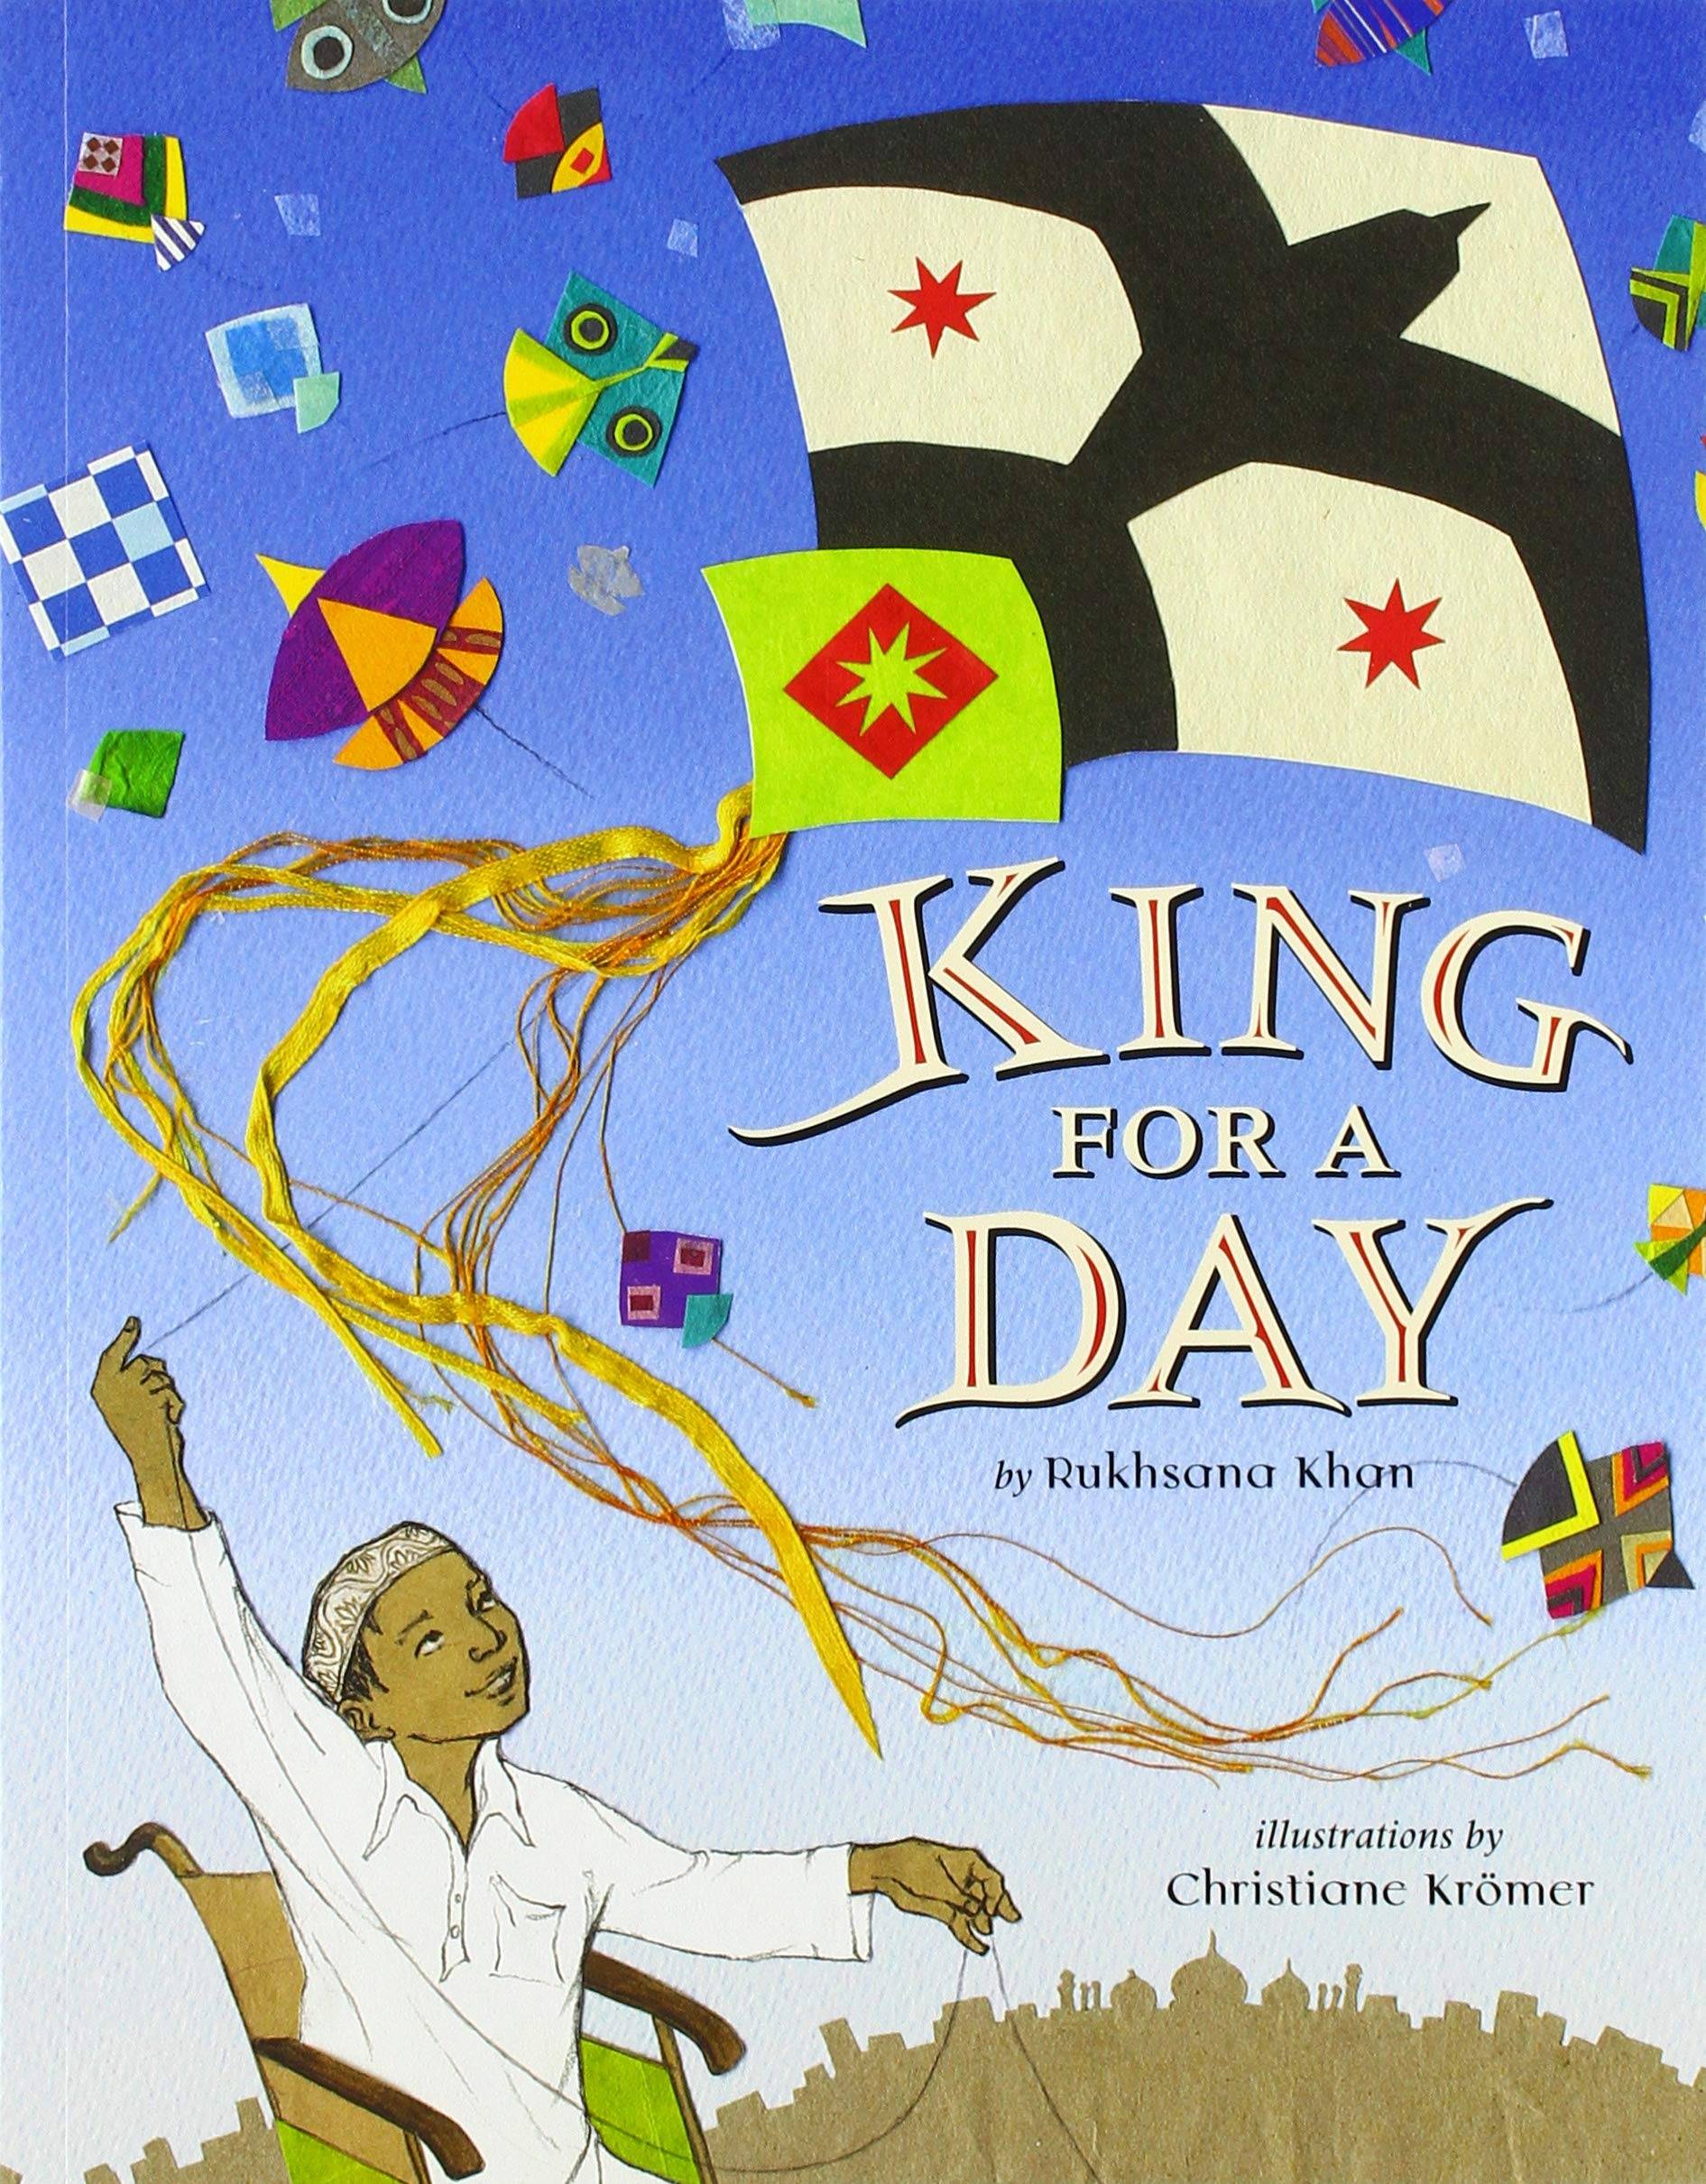 Illustrated book cover featuring a child and several flying color kites in the sky